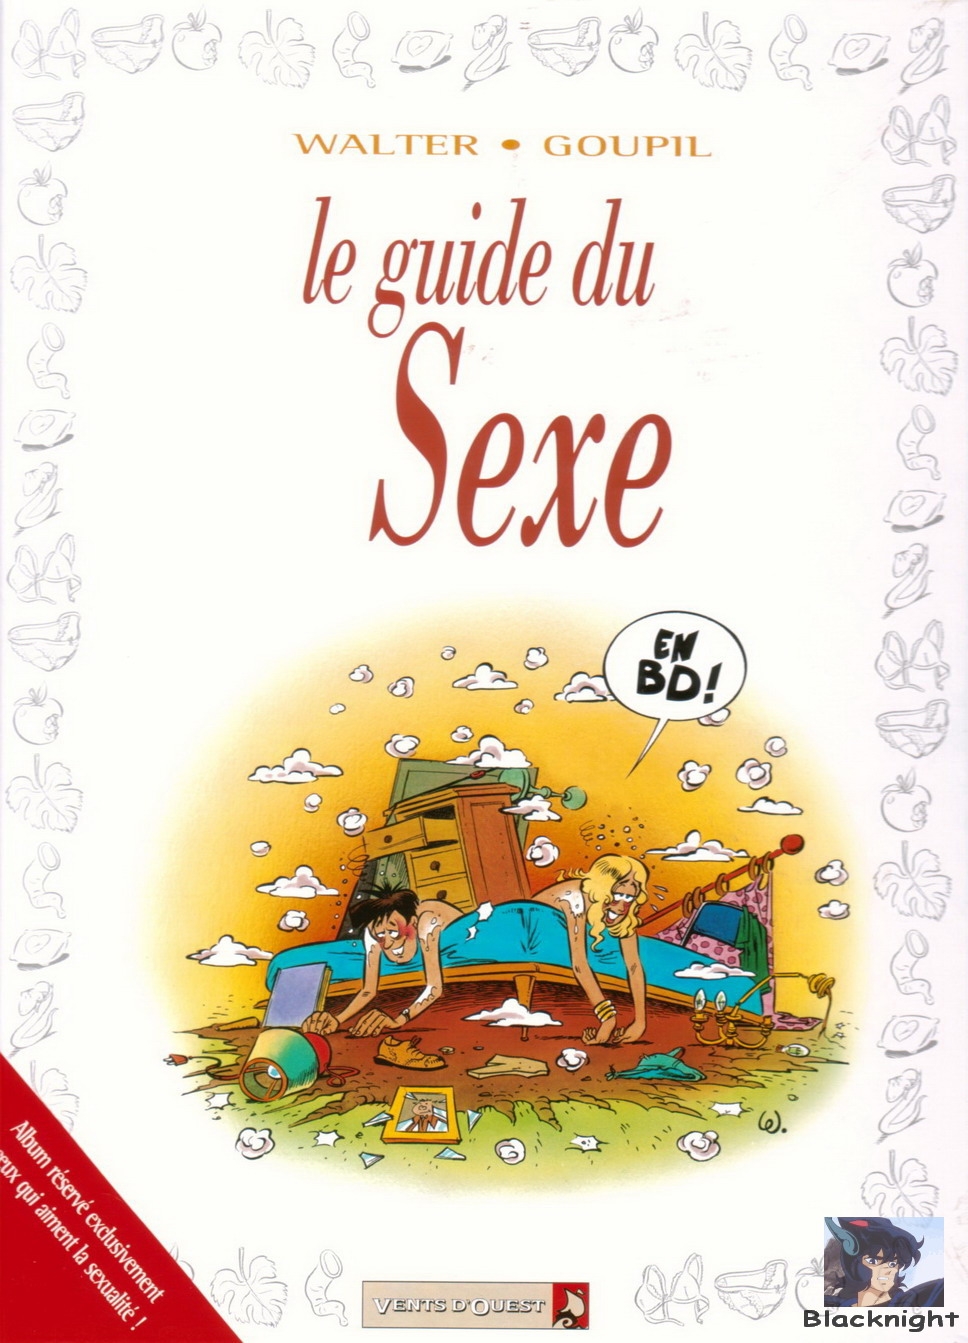 [Walter, Goupil] le guide du Sexe [French] 0